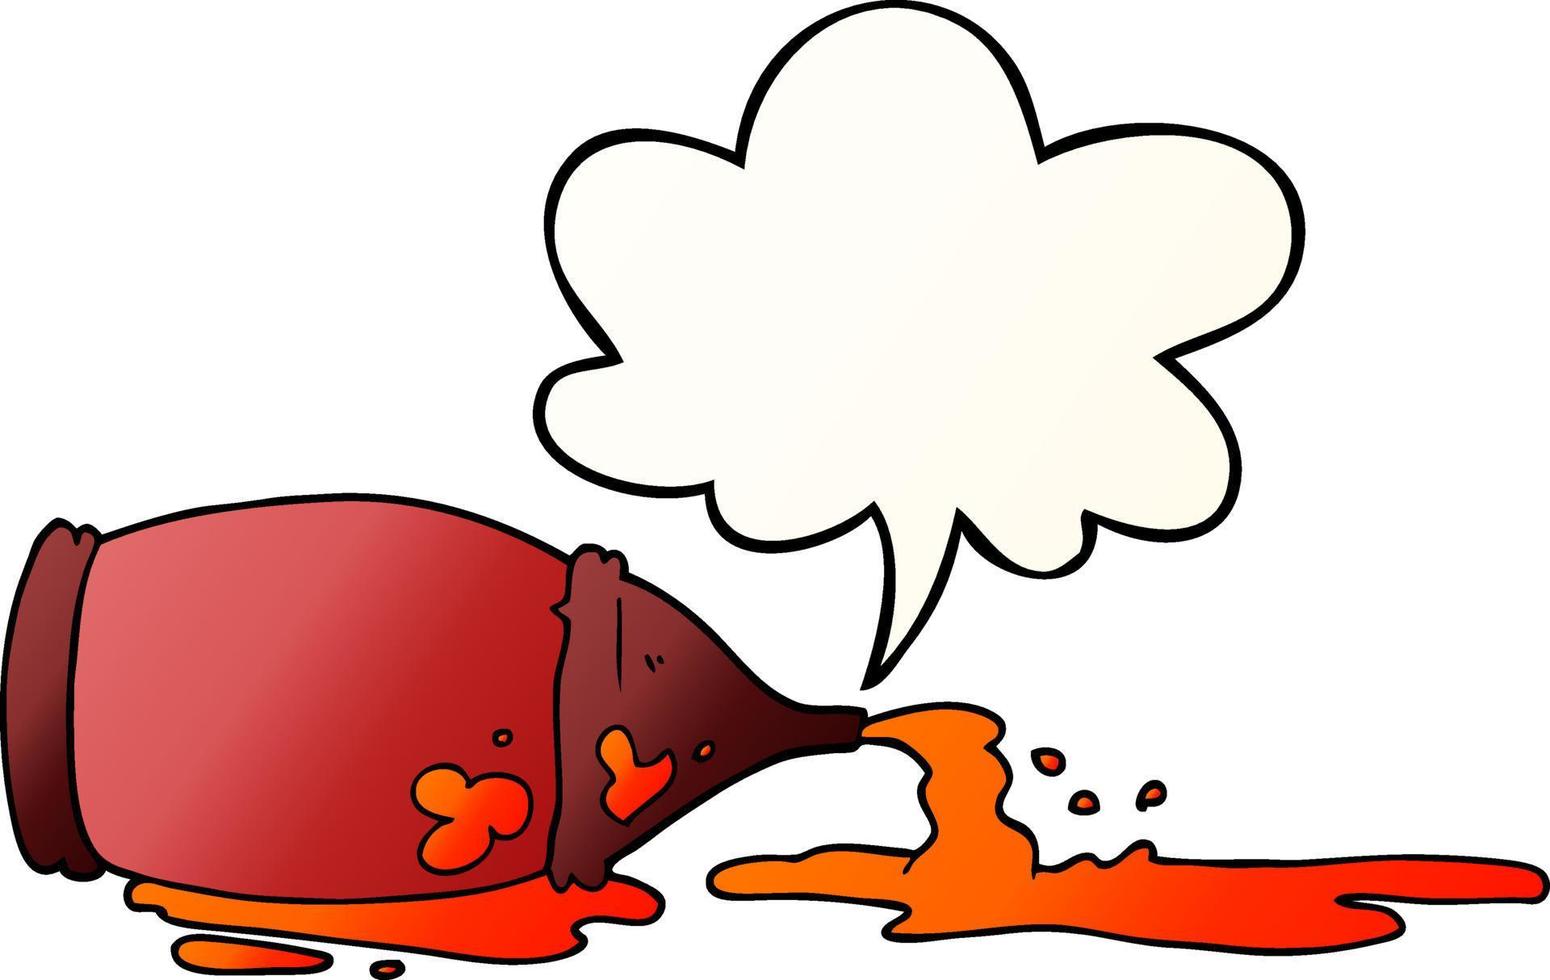 cartoon spilled ketchup bottle and speech bubble in smooth gradient style vector